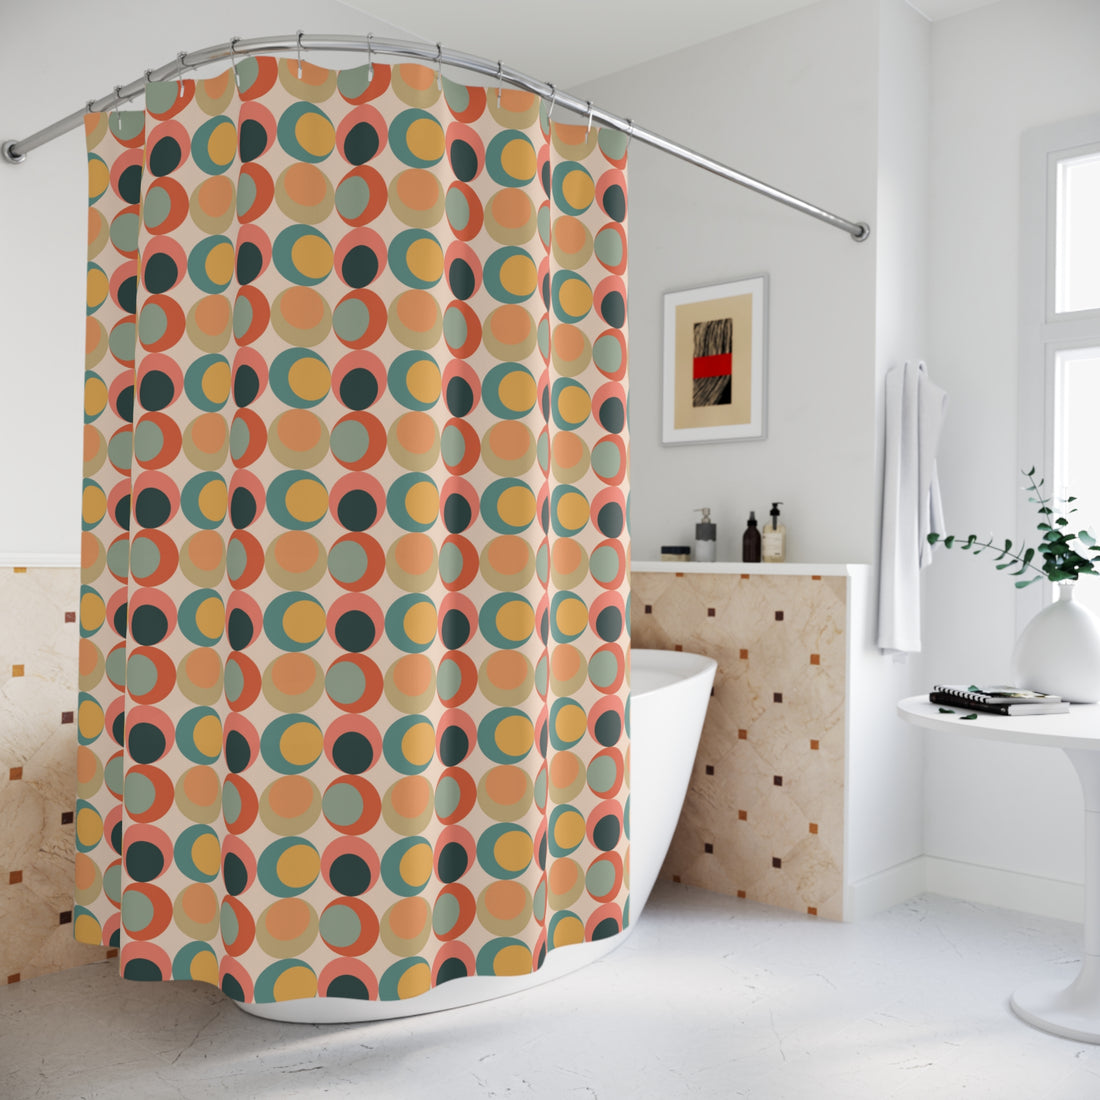 70s Designed Groovy Orb, 60s 70s Bathroom Colorful Funky Fun Shower Curtain